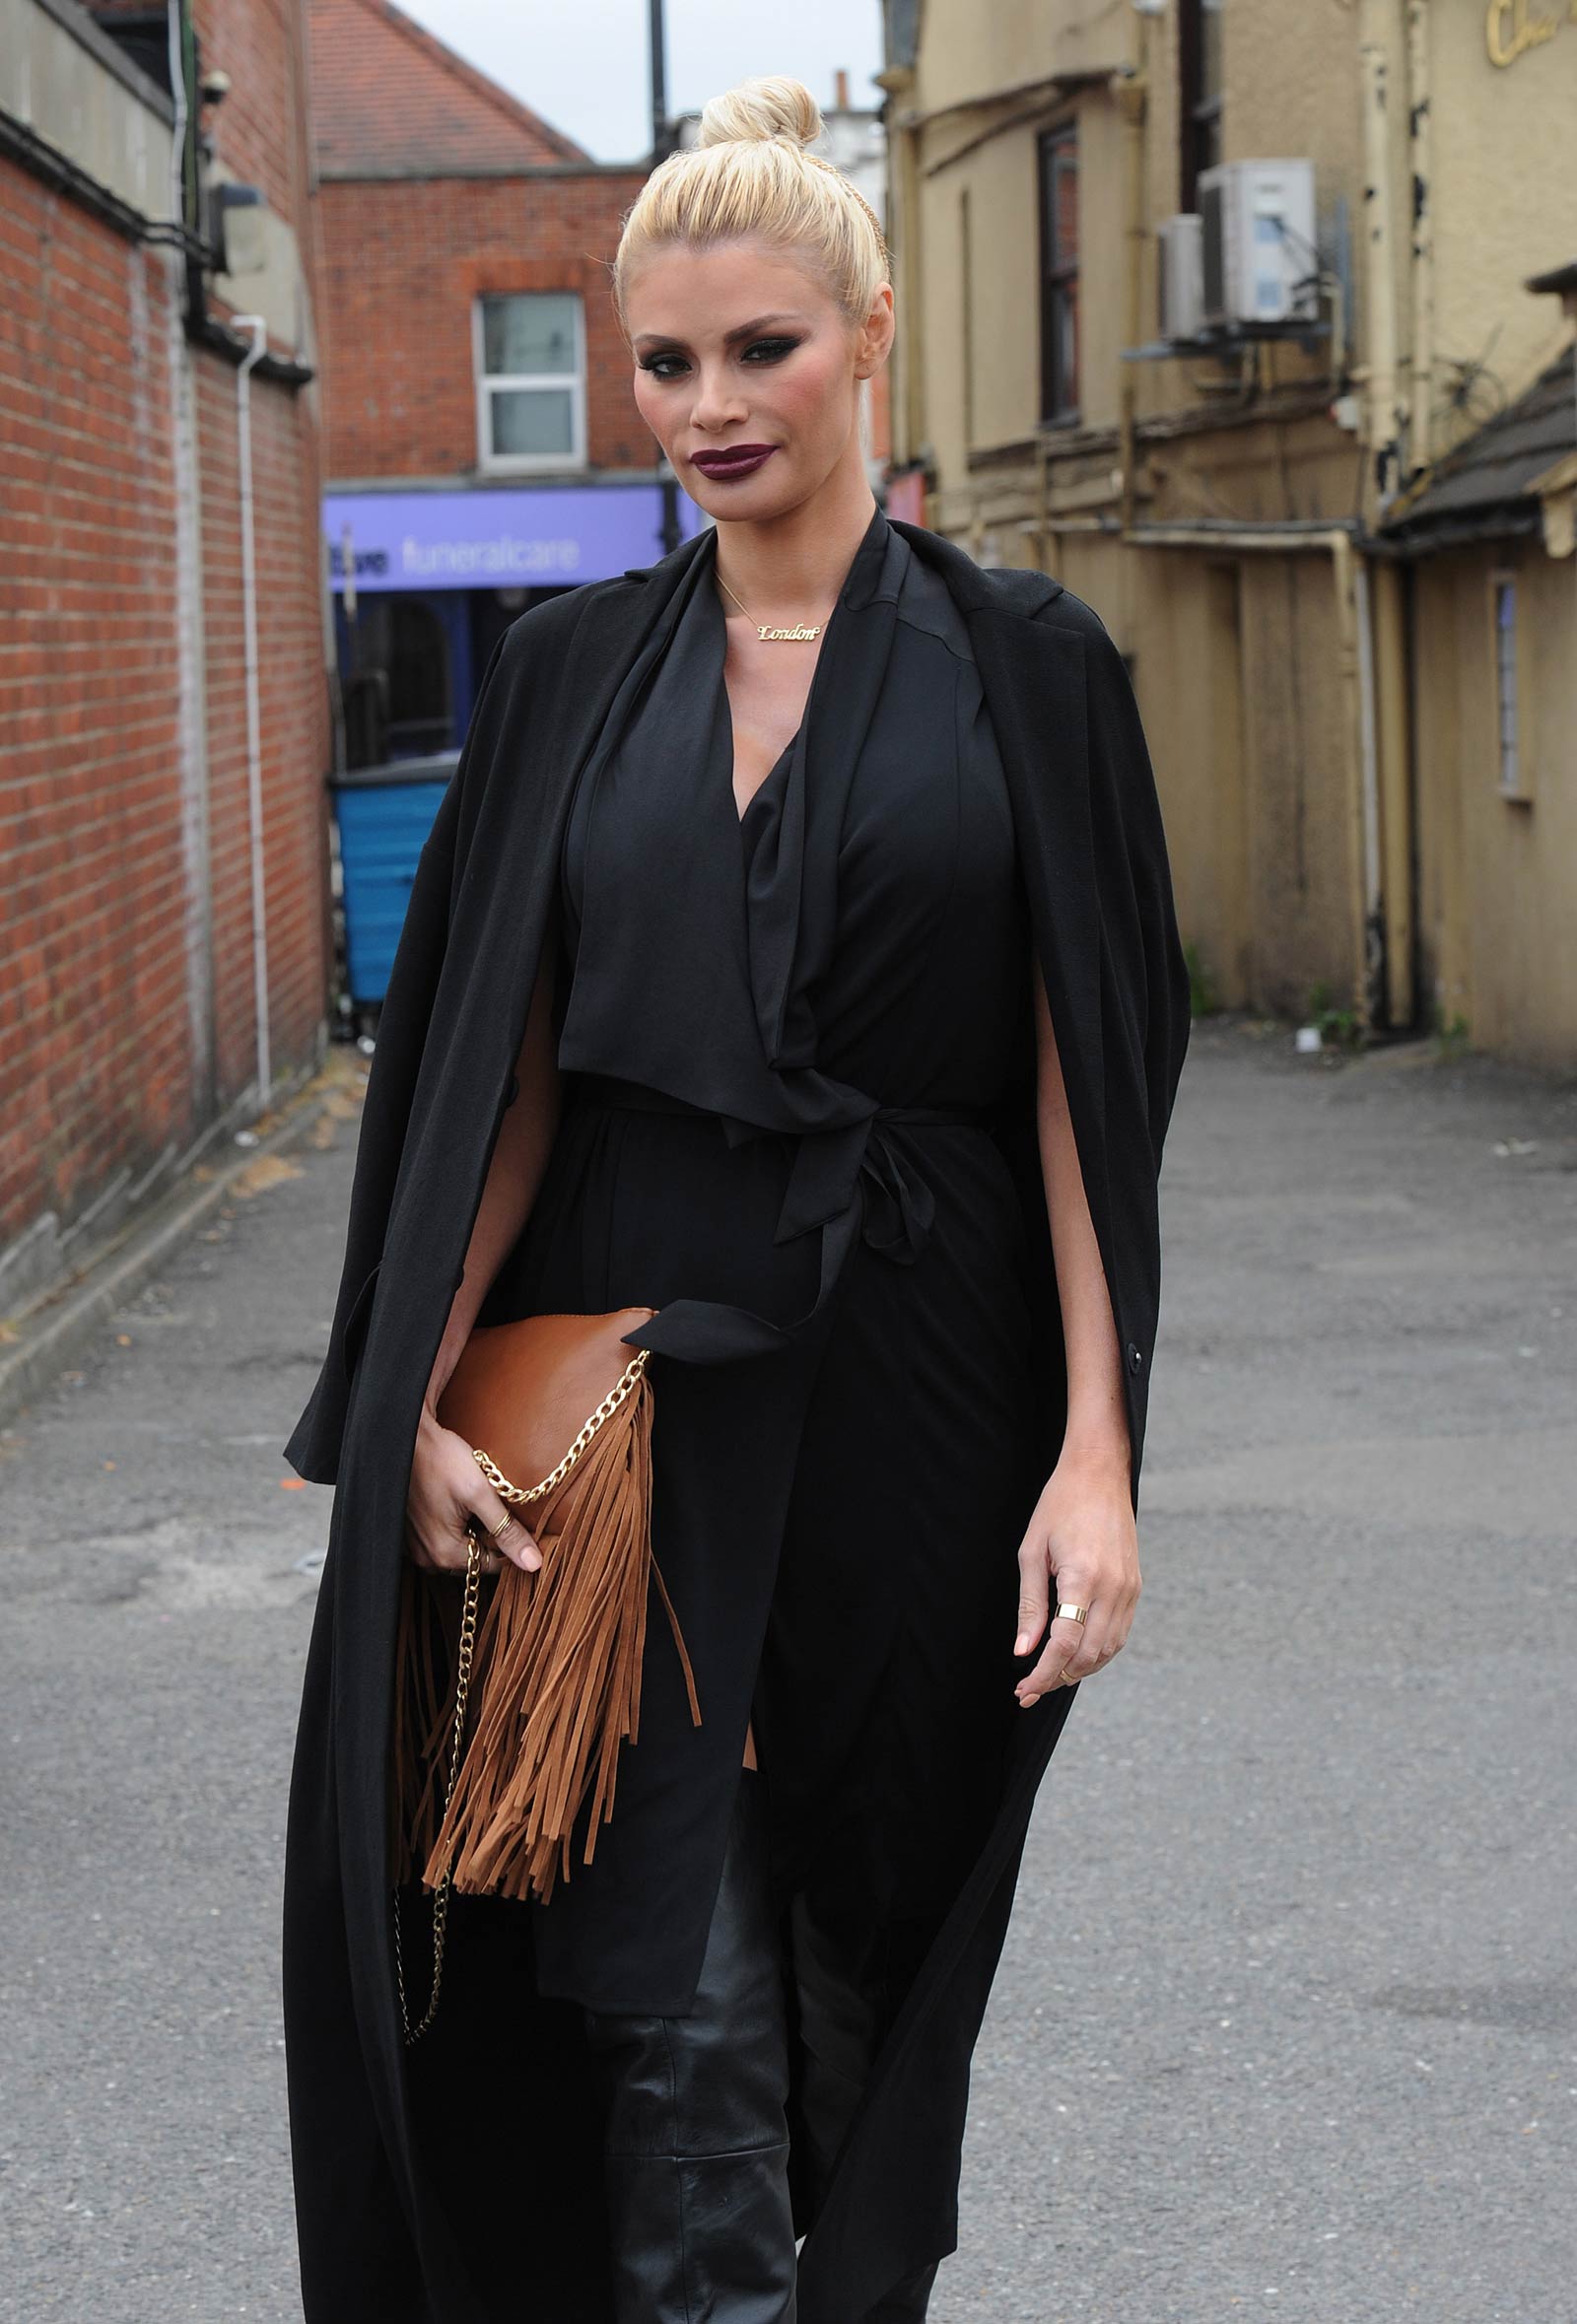 Chloe Sims filming scenes for TOWIE